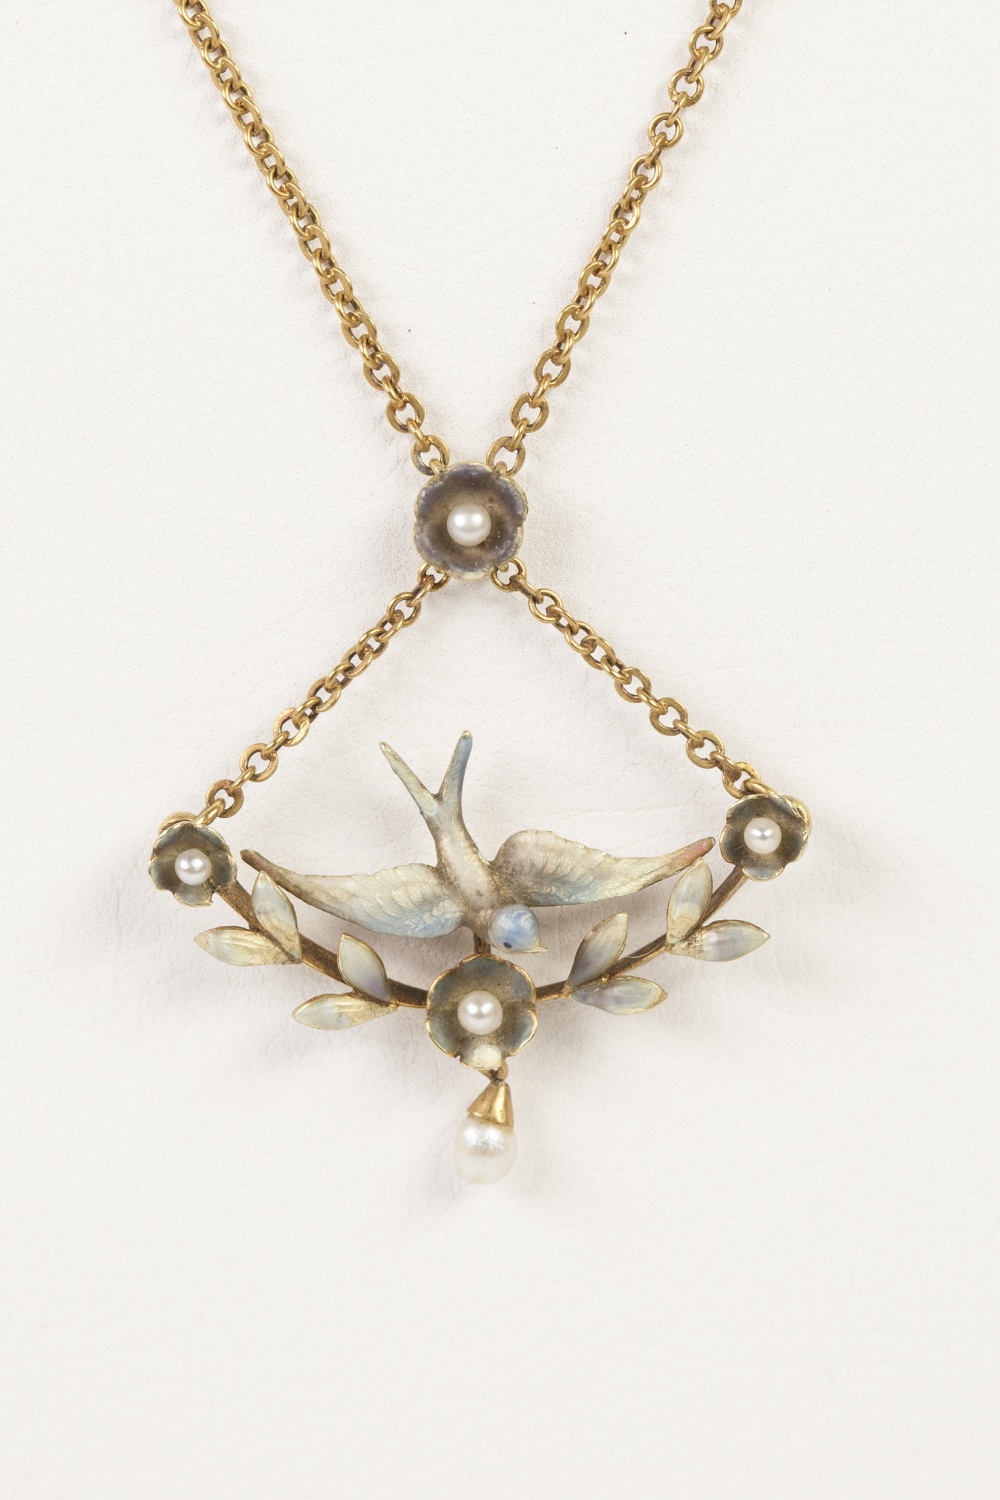 EDWARDIAN SILVER GILT CHAIN NECKLACE, with attached pendant front in the form of an enamelled - Image 2 of 2